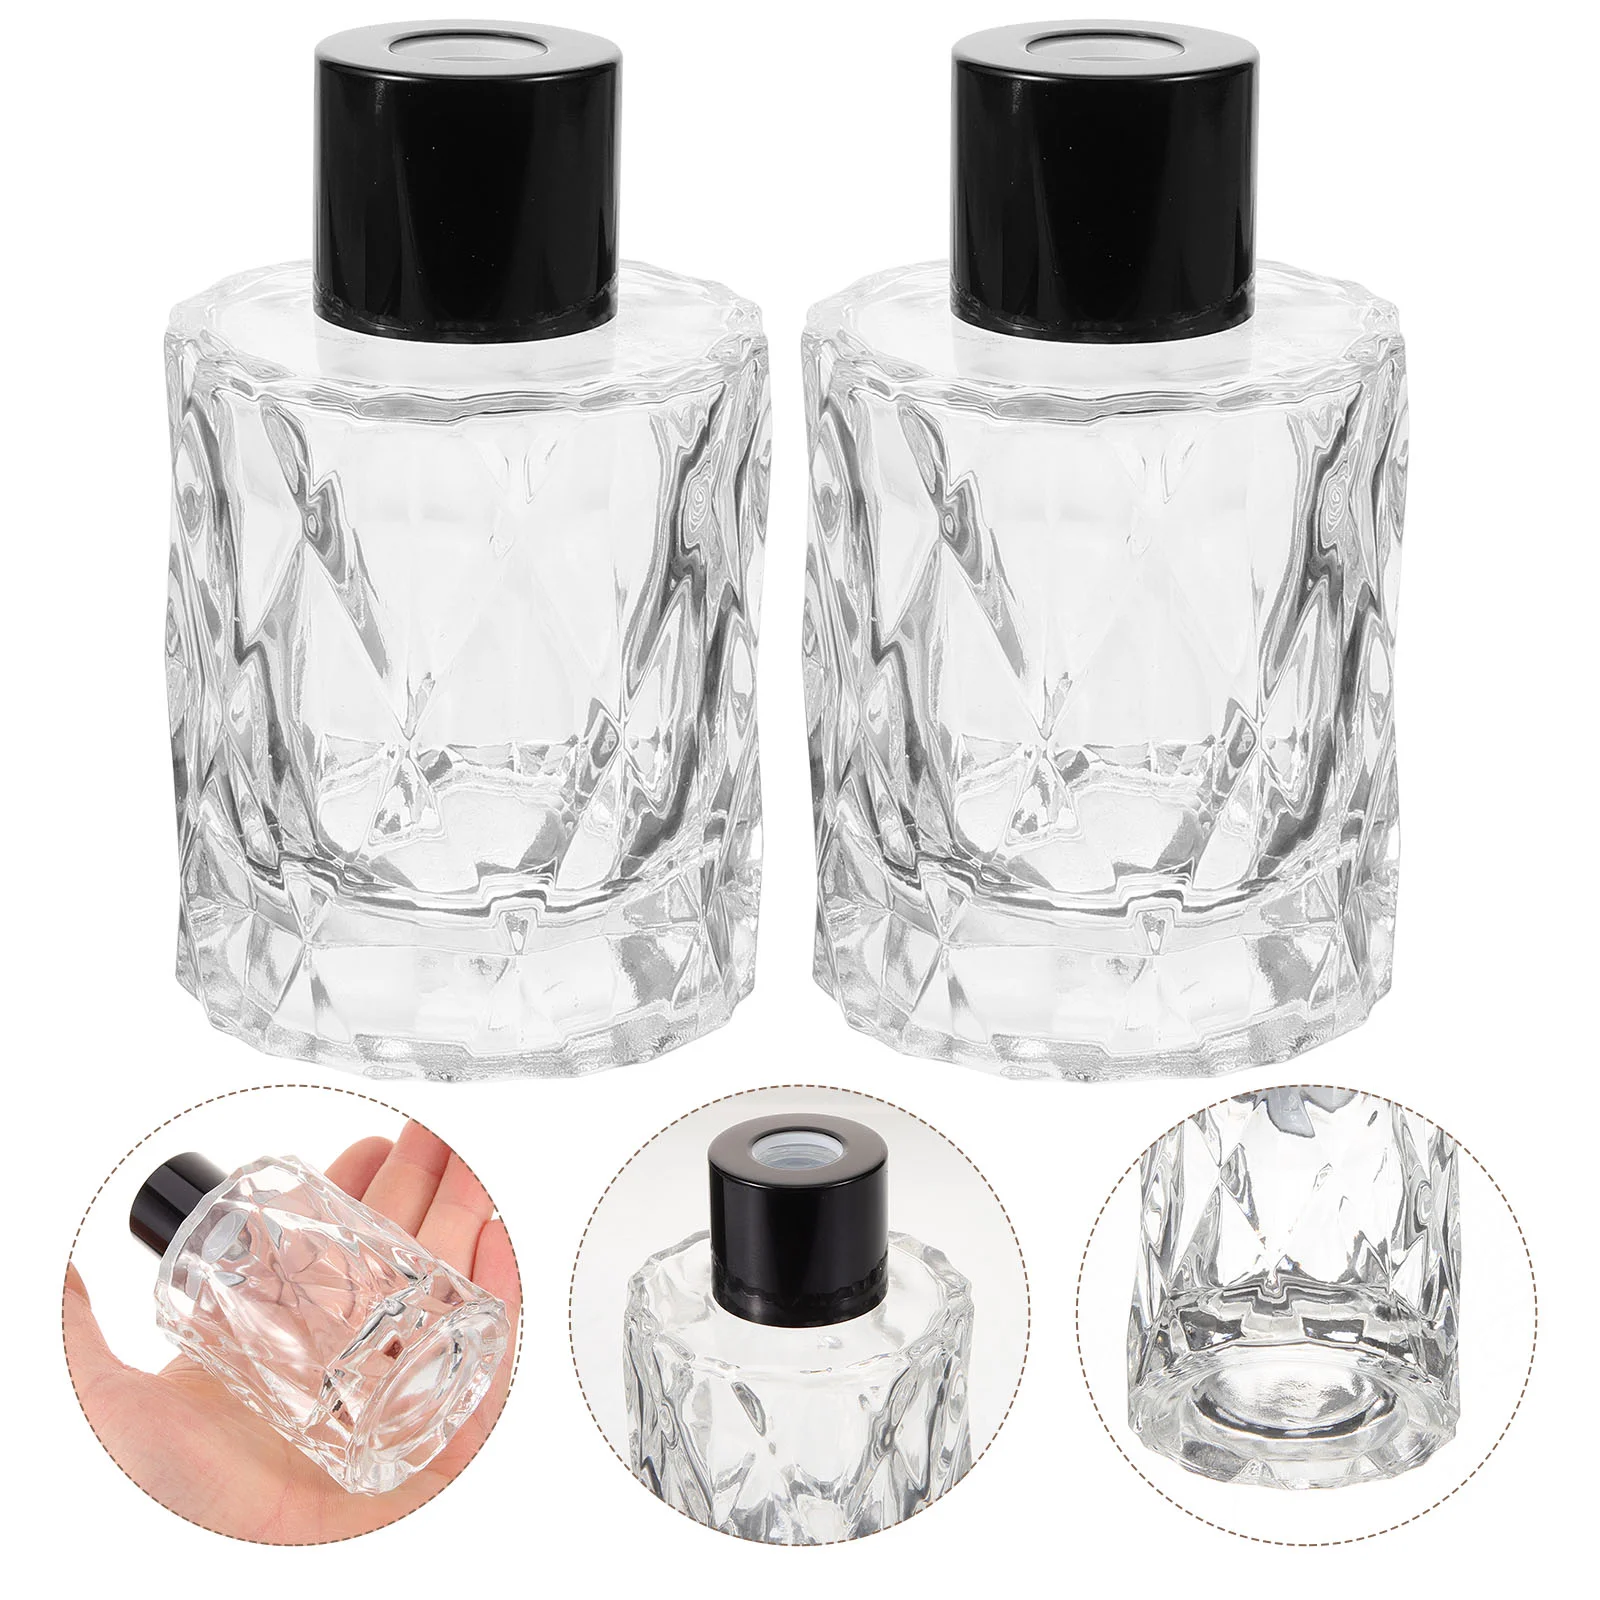 

4 Pcs Perfume Bottles Adornment Bedroom Filling Empty Diffuser Glass Containers